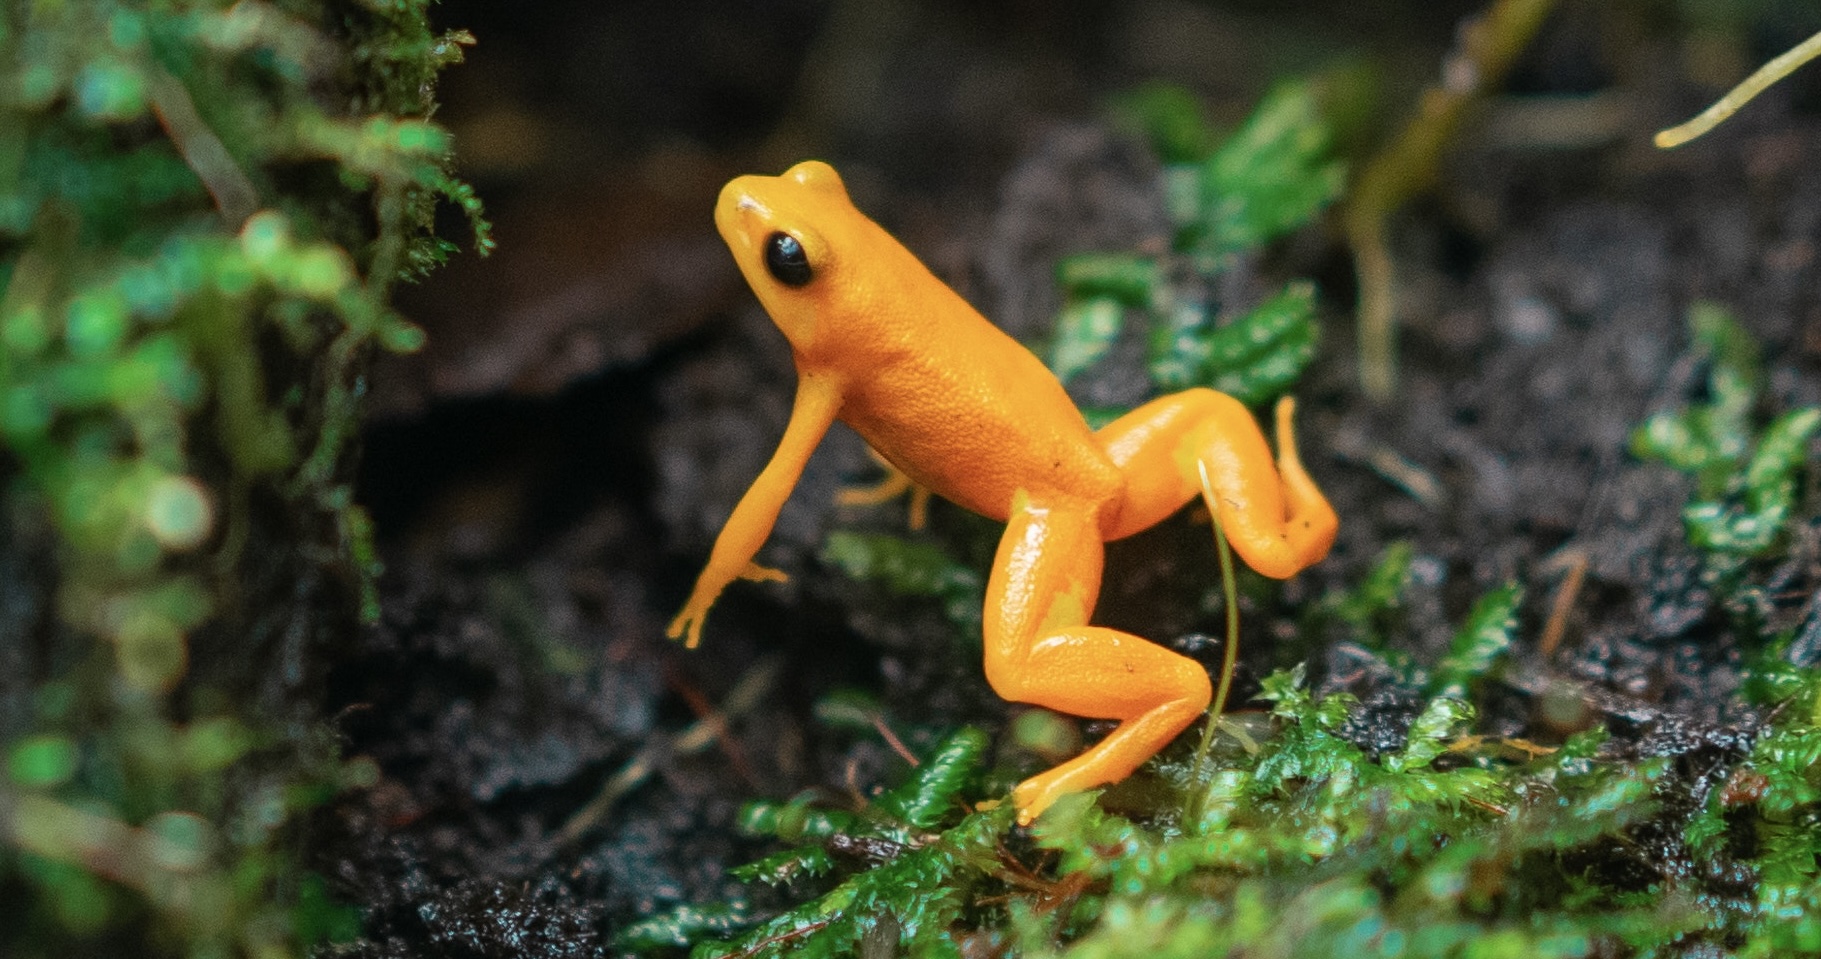 a bright orange frog on a grassy surface preparing to jump